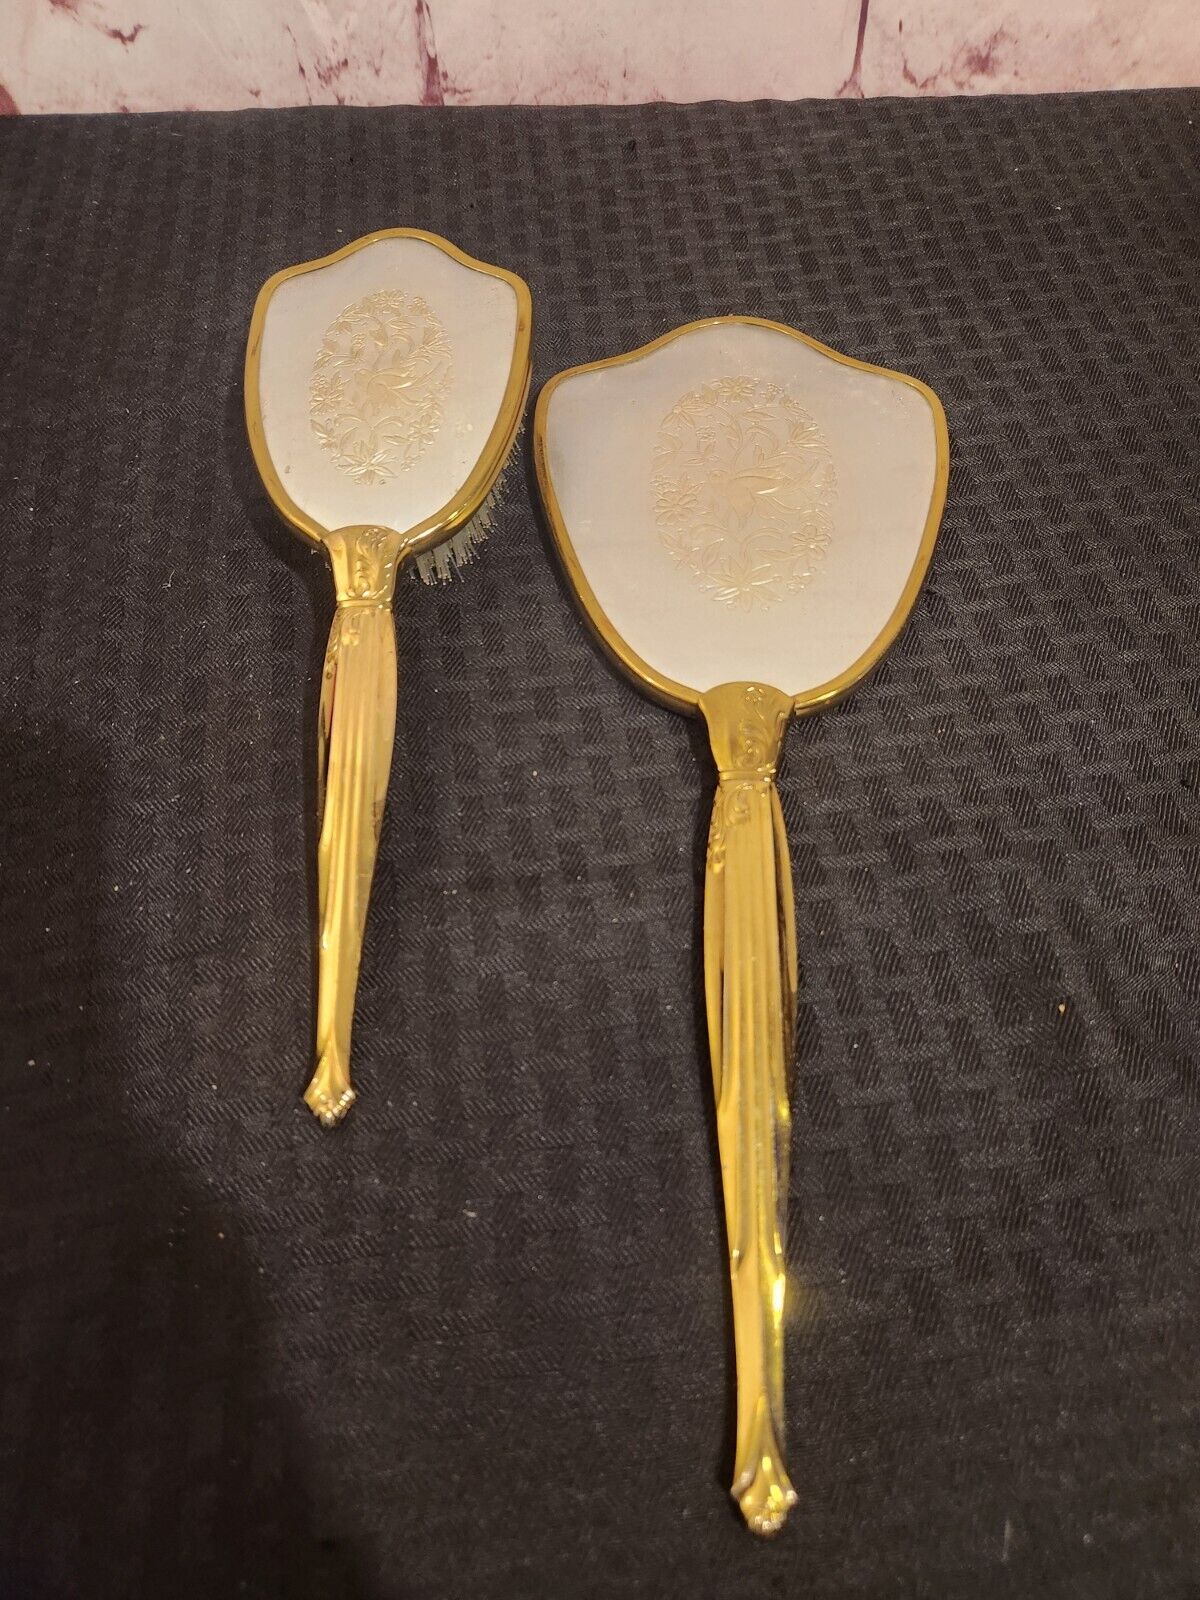 Vintage Hand Held Mirror and Brush Vanity Set Gold Tone W/ Floral With Bird 